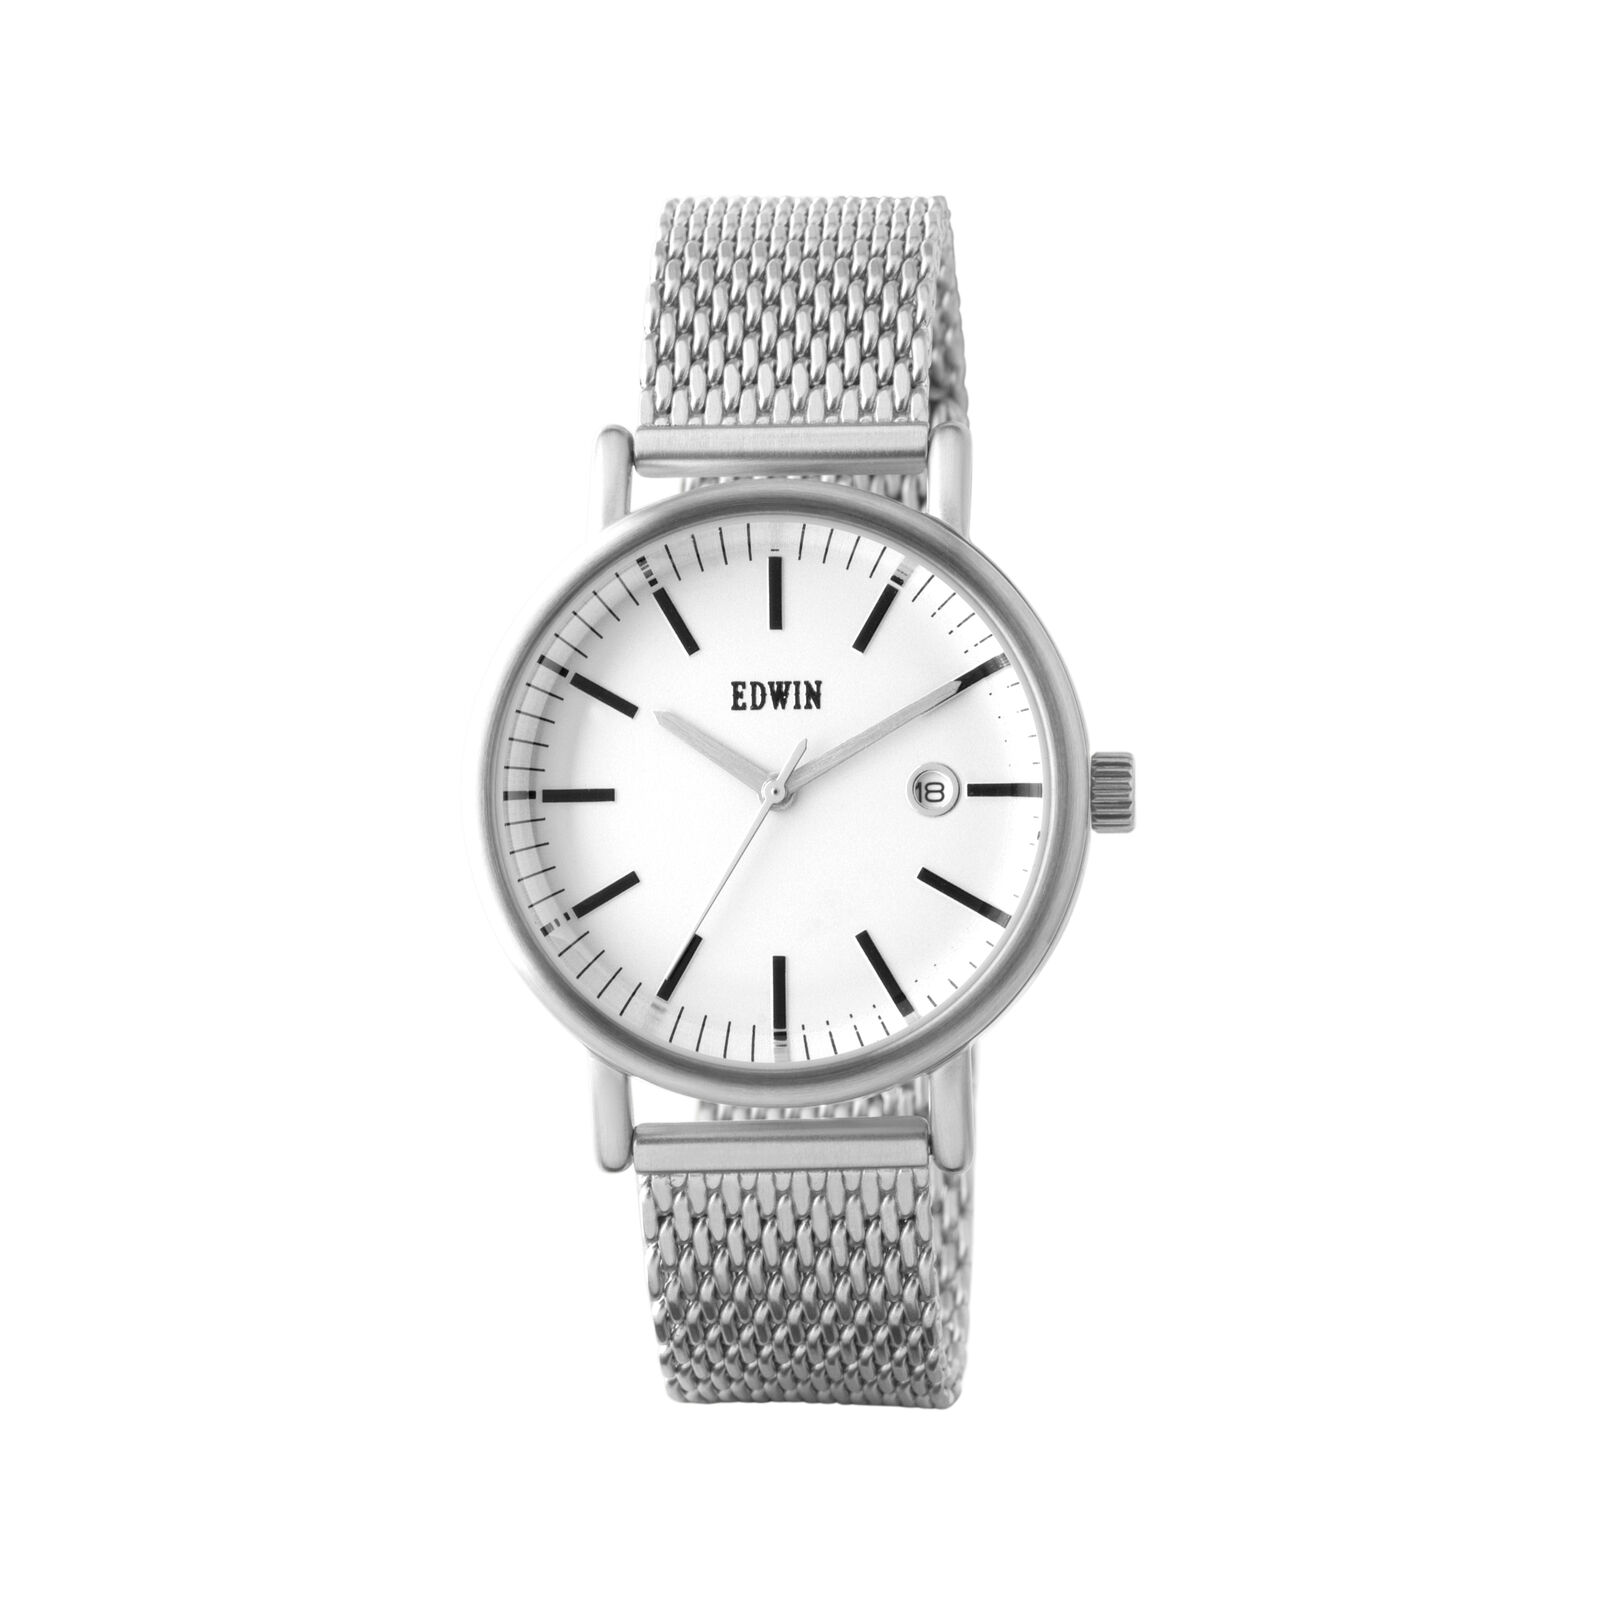 Edwin EPIC Women's 3 Hand-Date Watch, Stainless Steel Case and Band